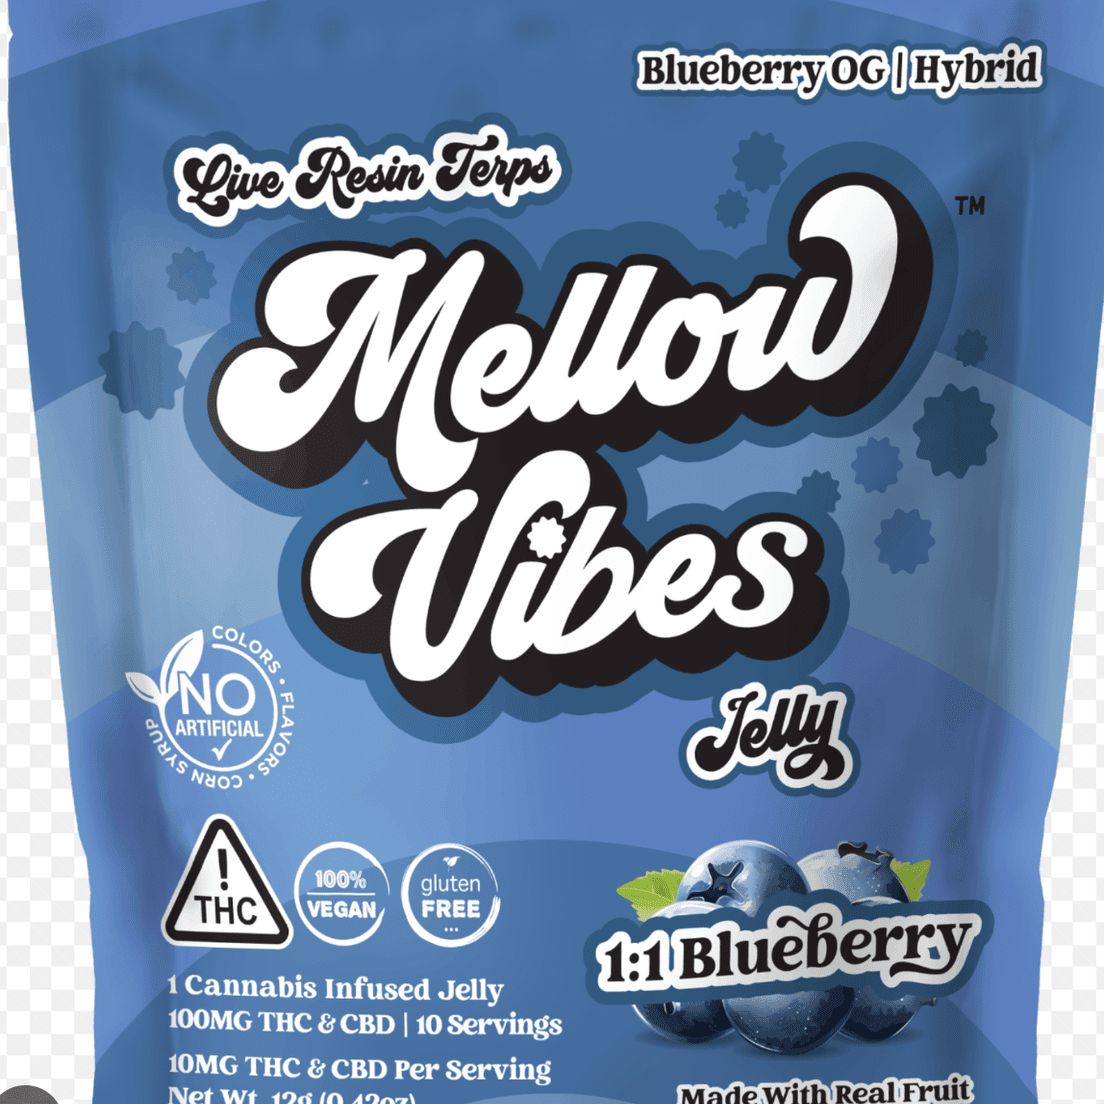 Mellow Vibes Live Resin Terps Jelly - 1:1 Blueberry ( Blueberry OG / Hybrid ) 100mg - GET A BOGO DEAL by ordering at Qualitycarecannabis.net